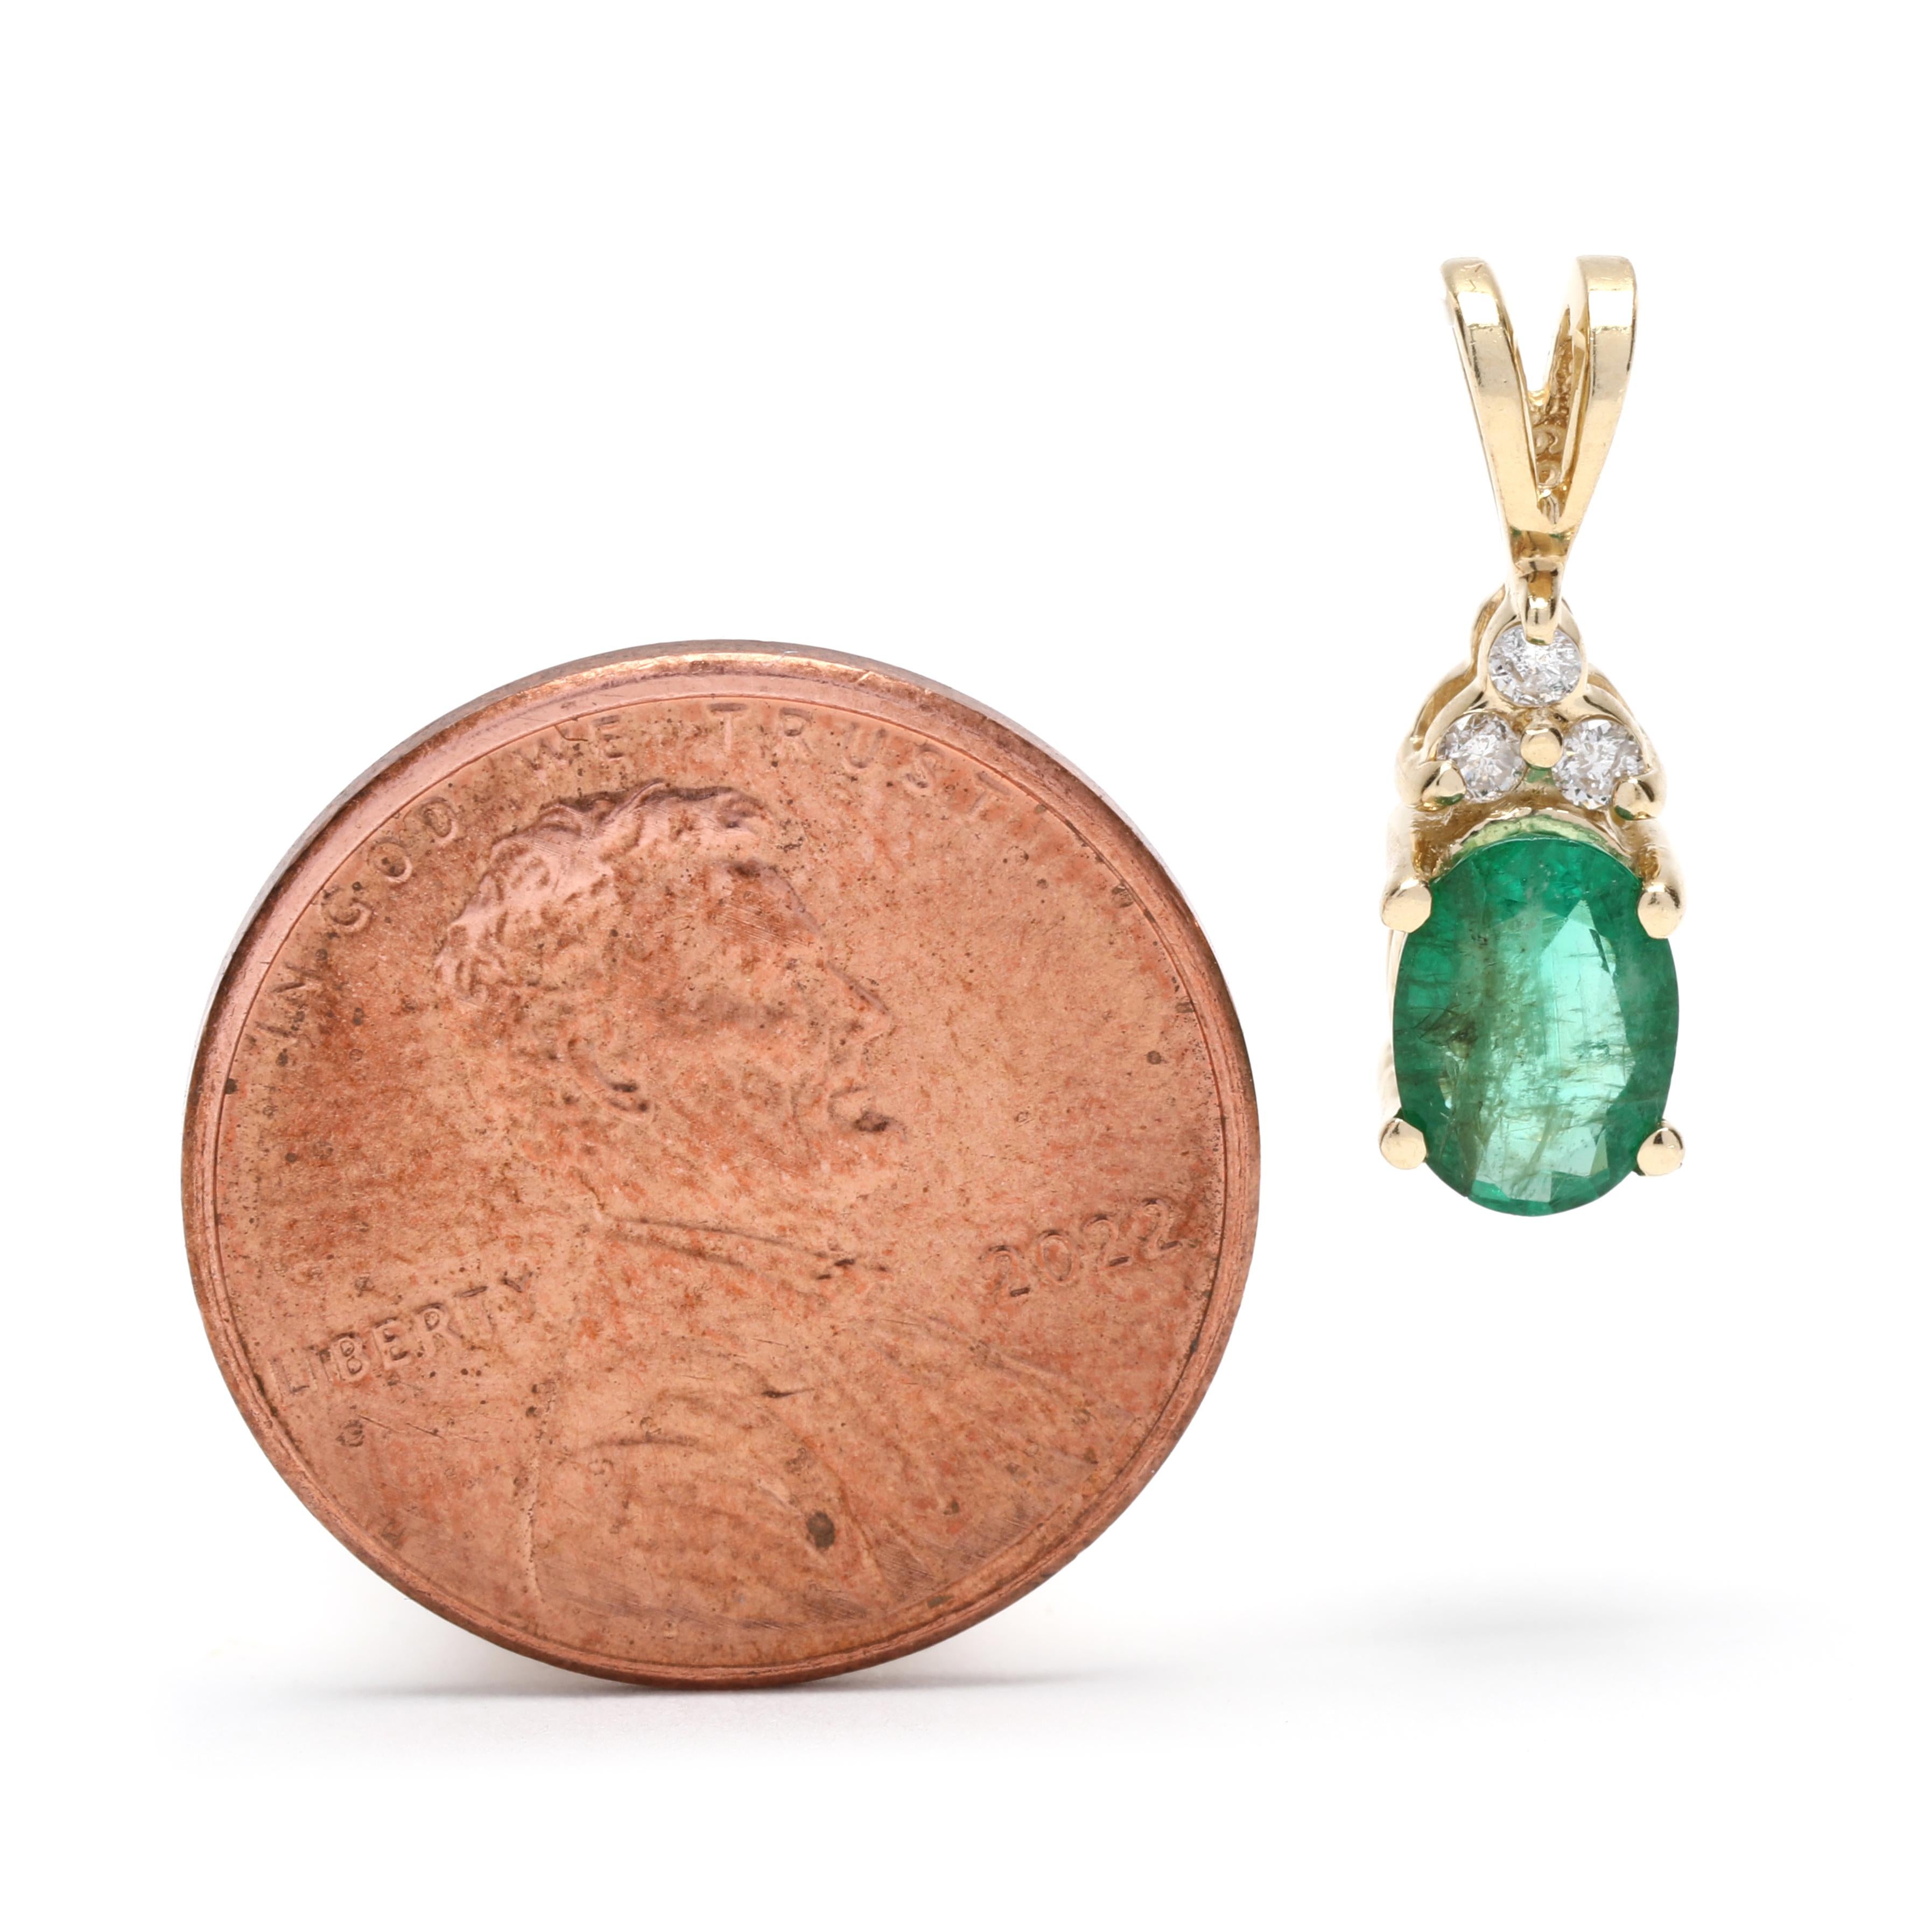 This 0.84ctw Emerald Diamond Pendant is the perfect way to add a touch of sparkle to your look. Crafted from 14K Yellow Gold, this piece features a classic design that is timeless and feminine. The pendant measures 5/8 inch in length and features a